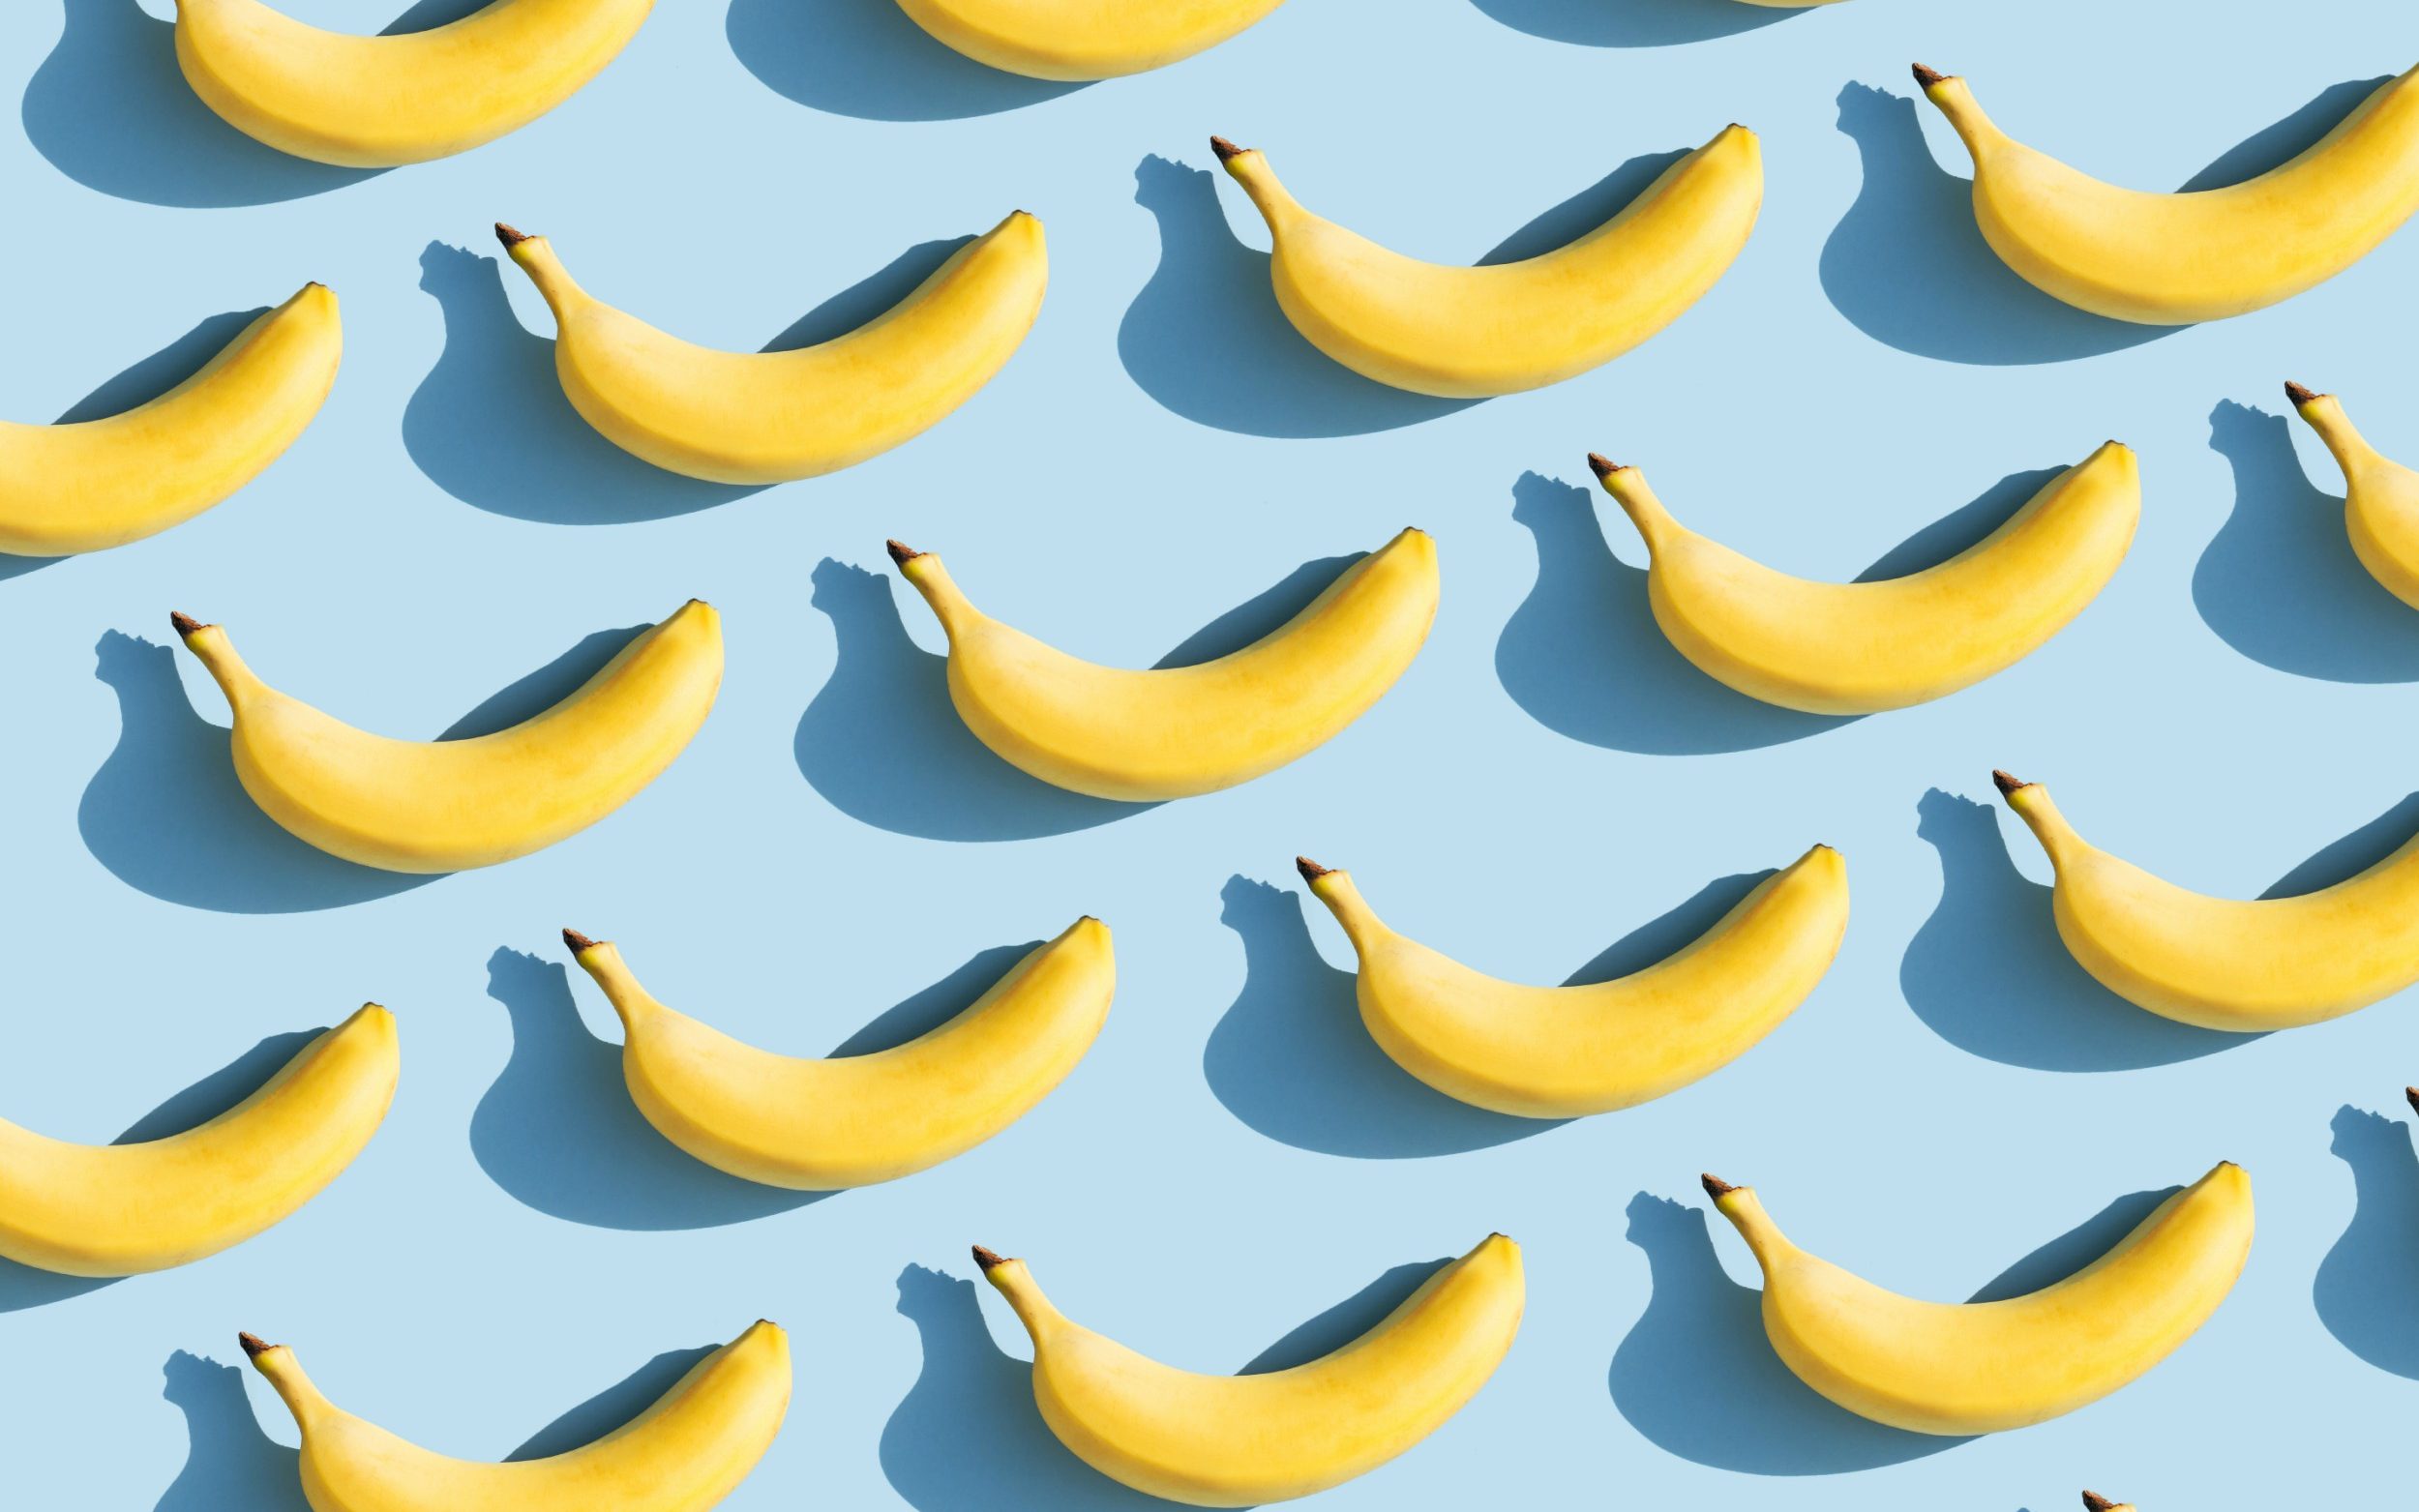 ‘a mars bar in a yellow skin’: the truth about bananas